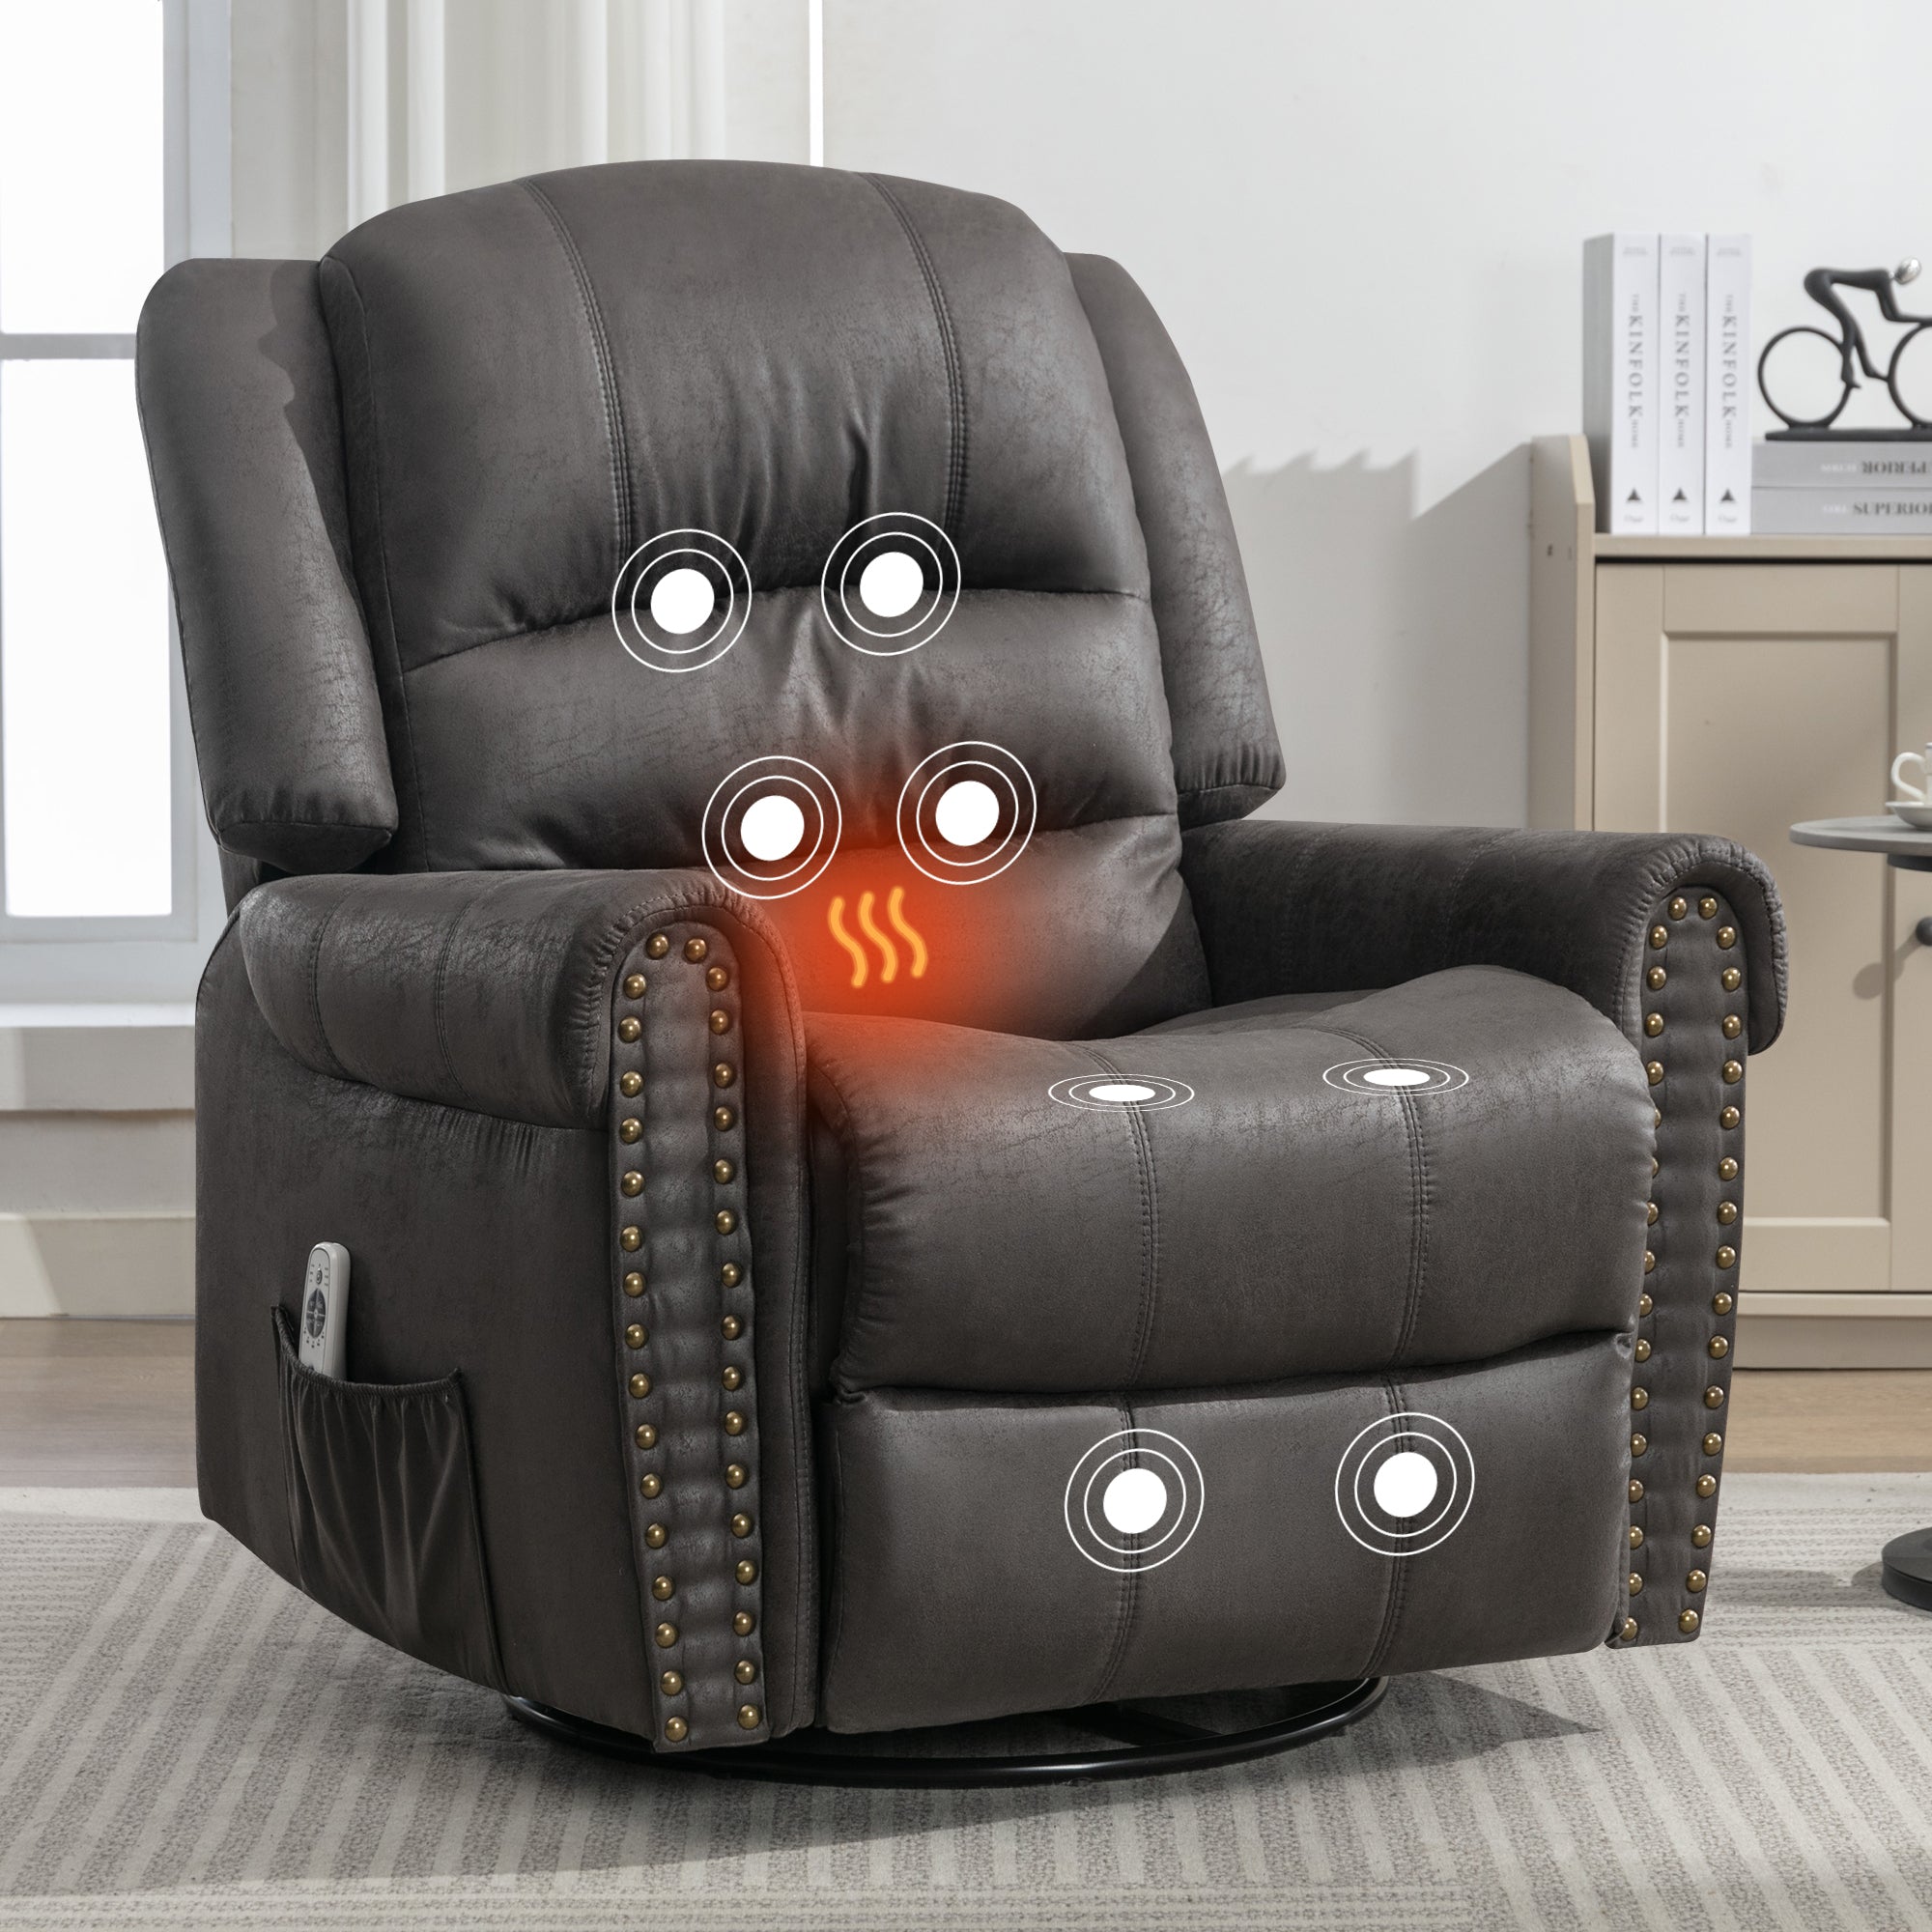 Liam Oversized Manual Pull Swivel Rocker Recliner With Vibrate Massage heat and USB Charge Port